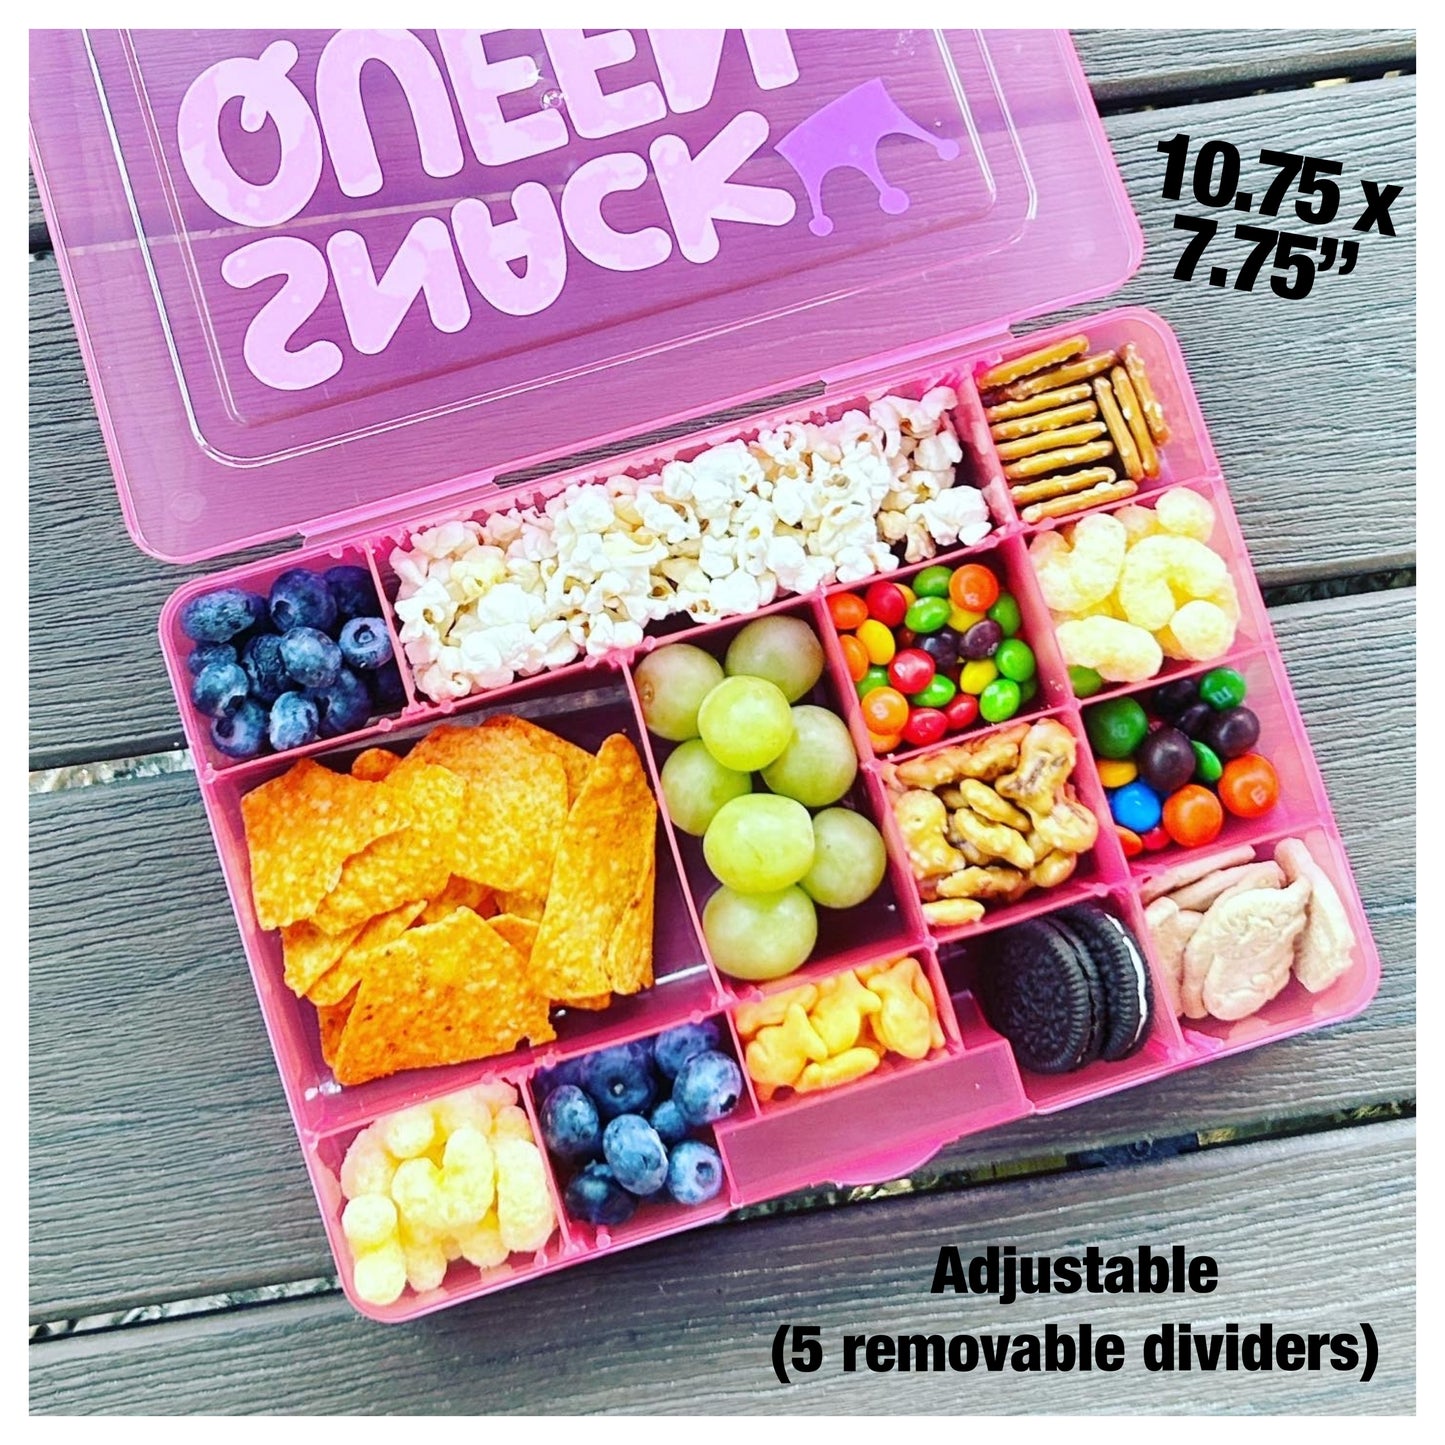 Aftermarket Worry-free Travel snack box listing is live!!!! My